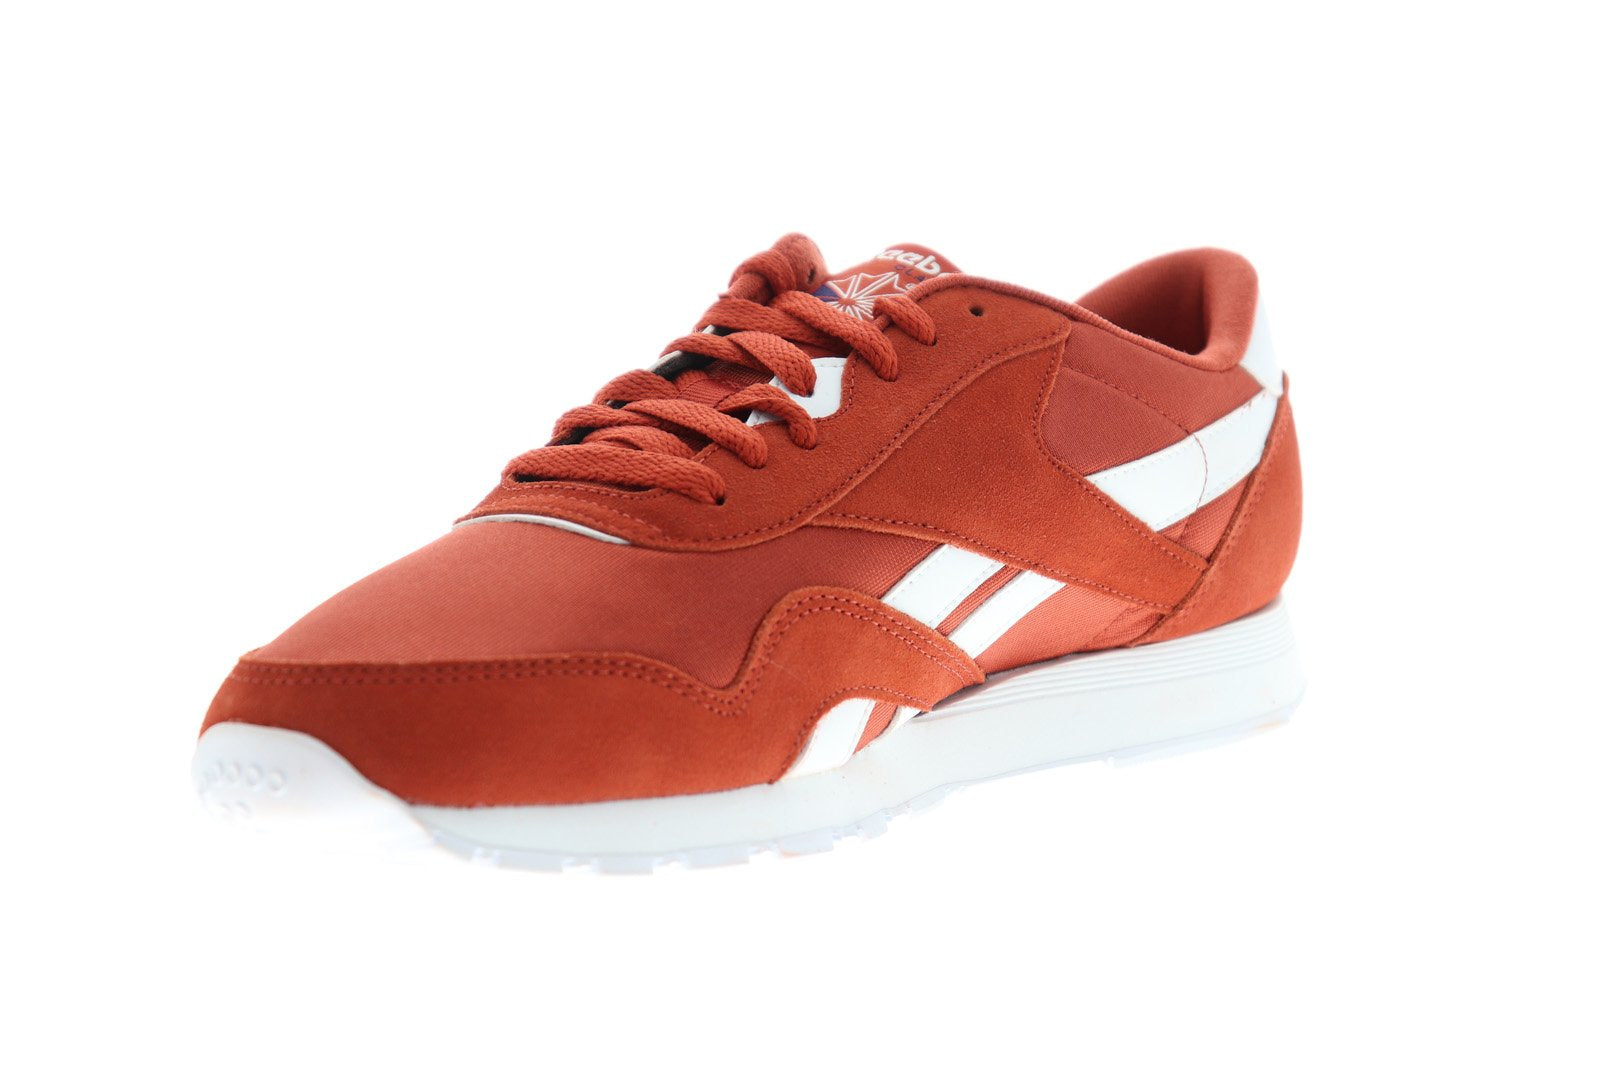 Reebok Classic DV5790 Mens Red Leather Casual Lifestyle Sneakers - Ruze Shoes